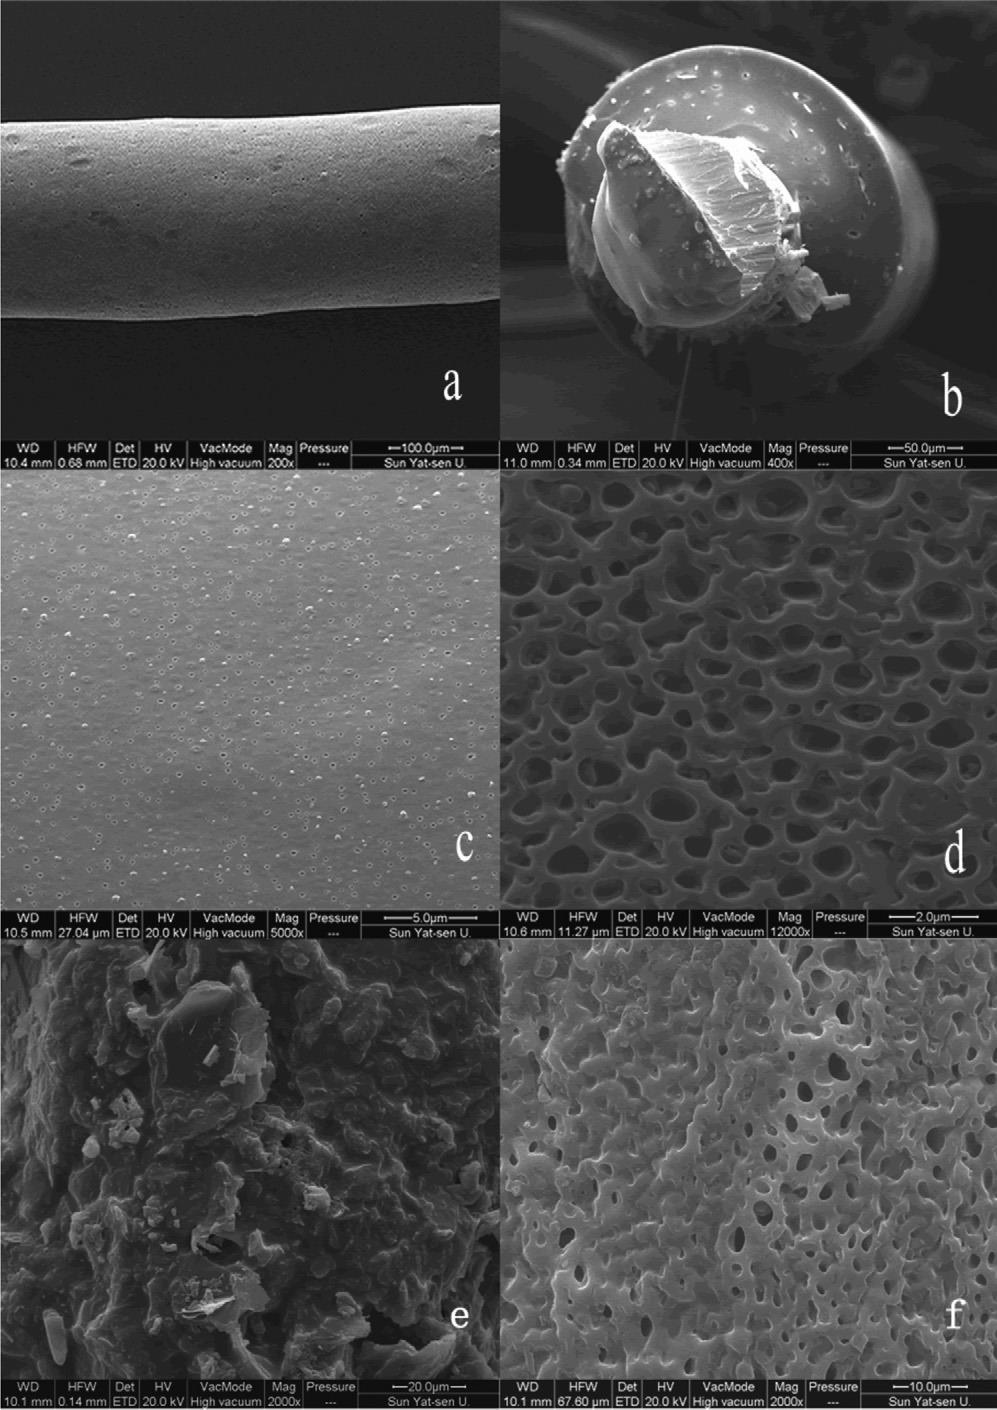 SPME Fibers A coated fused silica or steel wire Multiple Coatings - Graphene [right], Polyacrylate, metal alloys and other polymers Chen, J.; Zou, J.